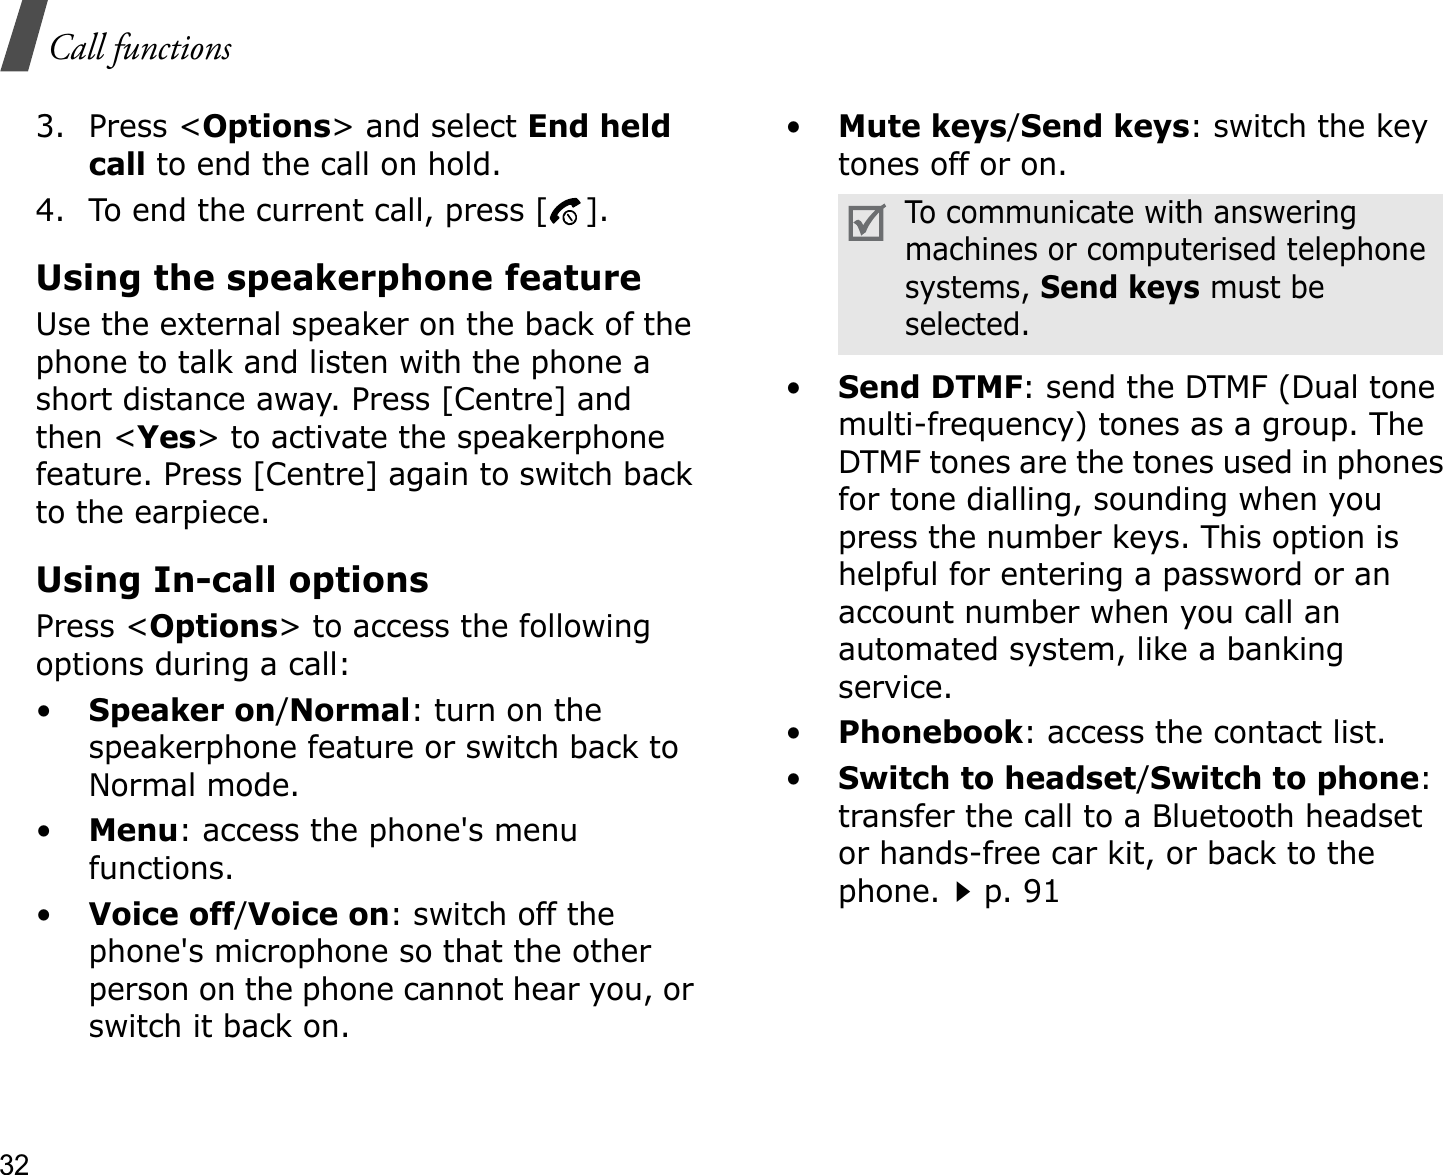 32Call functions3. Press &lt;Options&gt; and select End heldcall to end the call on hold.4. To end the current call, press [ ].Using the speakerphone featureUse the external speaker on the back of the phone to talk and listen with the phone a short distance away. Press [Centre] and then &lt;Yes&gt; to activate the speakerphone feature. Press [Centre] again to switch back to the earpiece.Using In-call optionsPress &lt;Options&gt; to access the following options during a call:•Speaker on/Normal: turn on the speakerphone feature or switch back to Normal mode.•Menu: access the phone&apos;s menu functions.•Voice off/Voice on: switch off the phone&apos;s microphone so that the other person on the phone cannot hear you, or switch it back on.•Mute keys/Send keys: switch the key tones off or on.•Send DTMF: send the DTMF (Dual tone multi-frequency) tones as a group. The DTMF tones are the tones used in phones for tone dialling, sounding when you press the number keys. This option is helpful for entering a password or an account number when you call an automated system, like a banking service.•Phonebook: access the contact list.•Switch to headset/Switch to phone:transfer the call to a Bluetooth headset or hands-free car kit, or back to the phone.p. 91To communicate with answering machines or computerised telephone systems, Send keys must be selected.